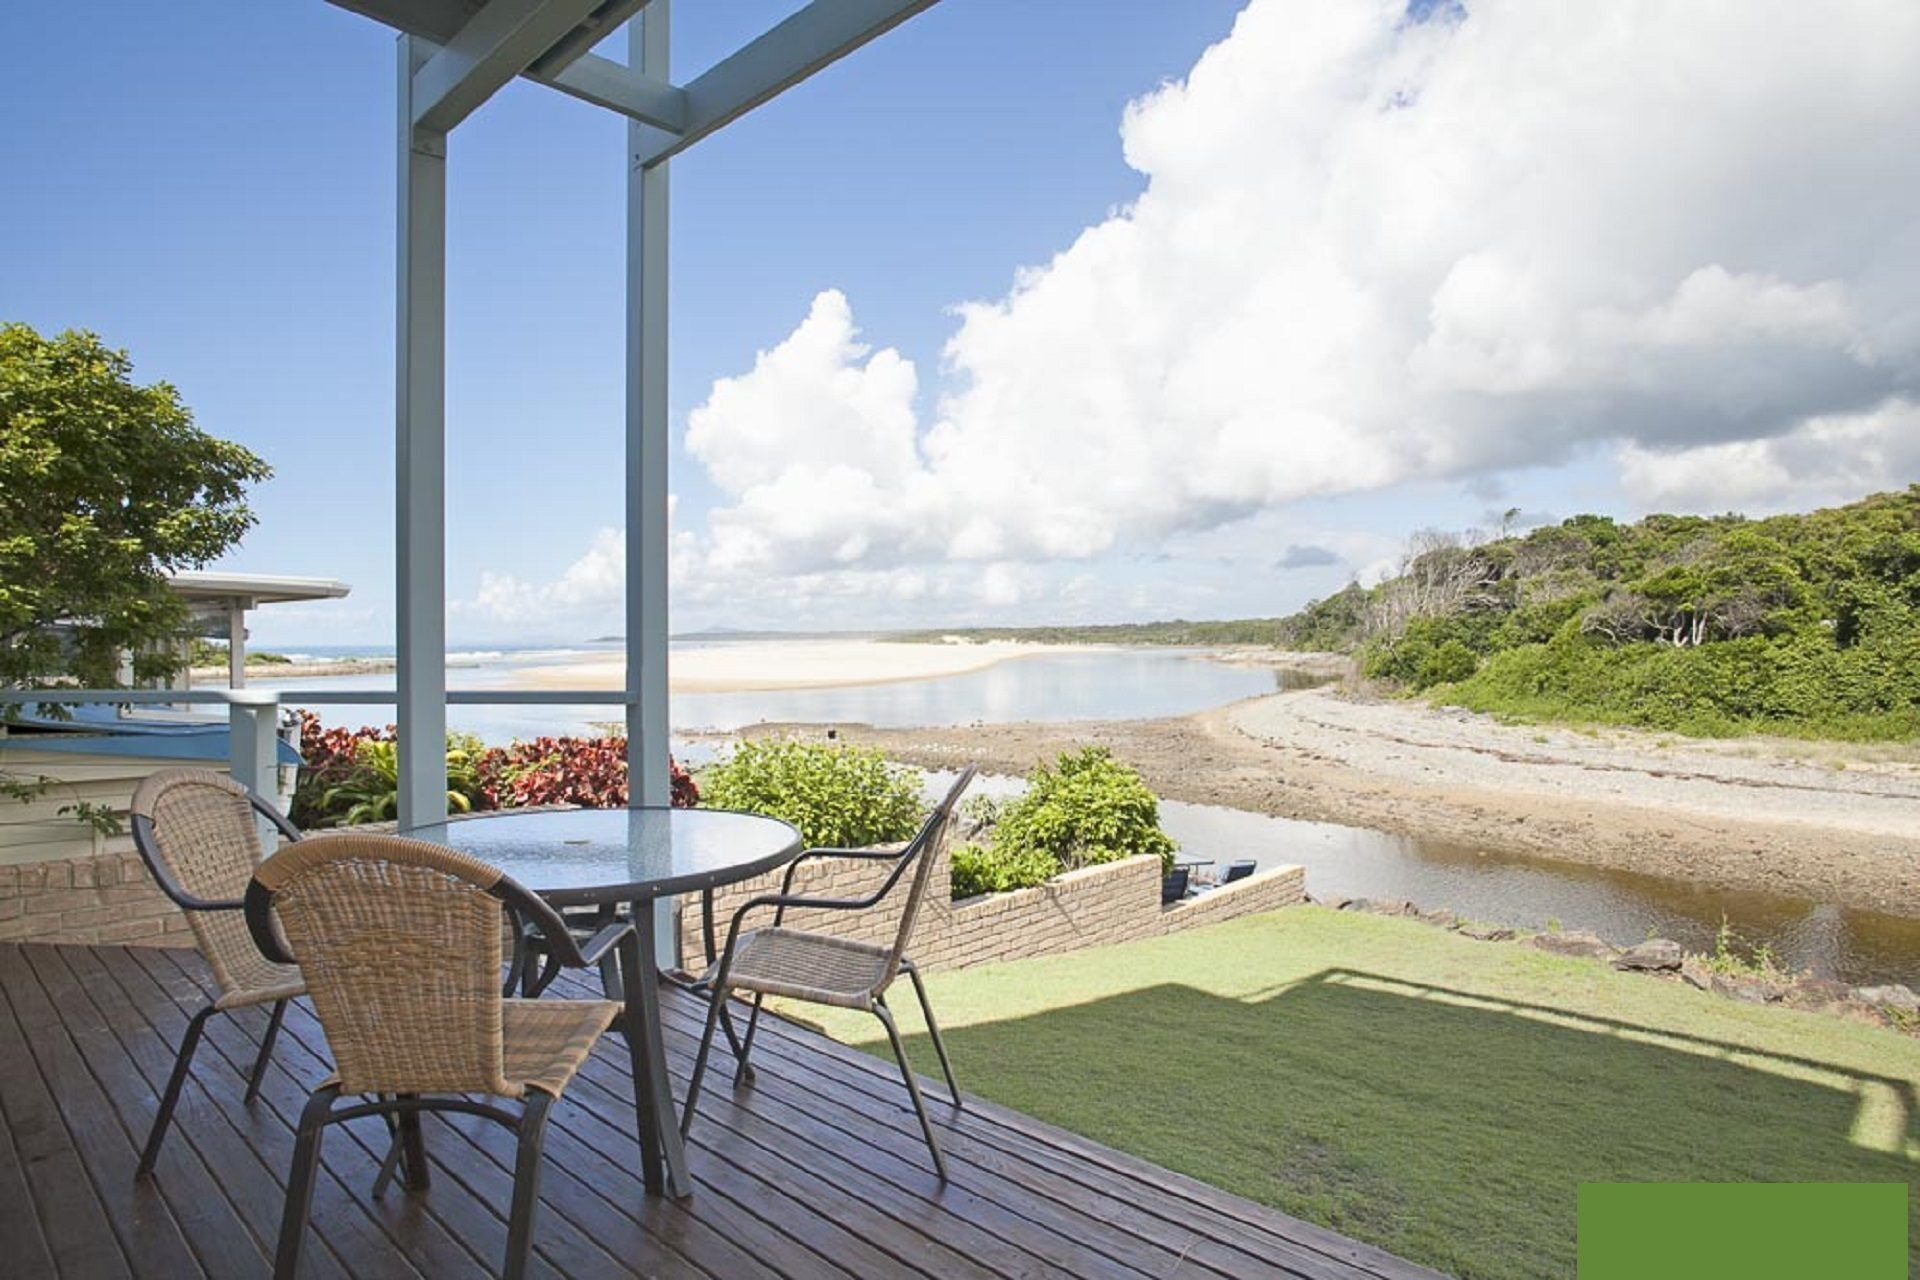 Nosie 1 - Spacious Townhouse Situated on the Estuary